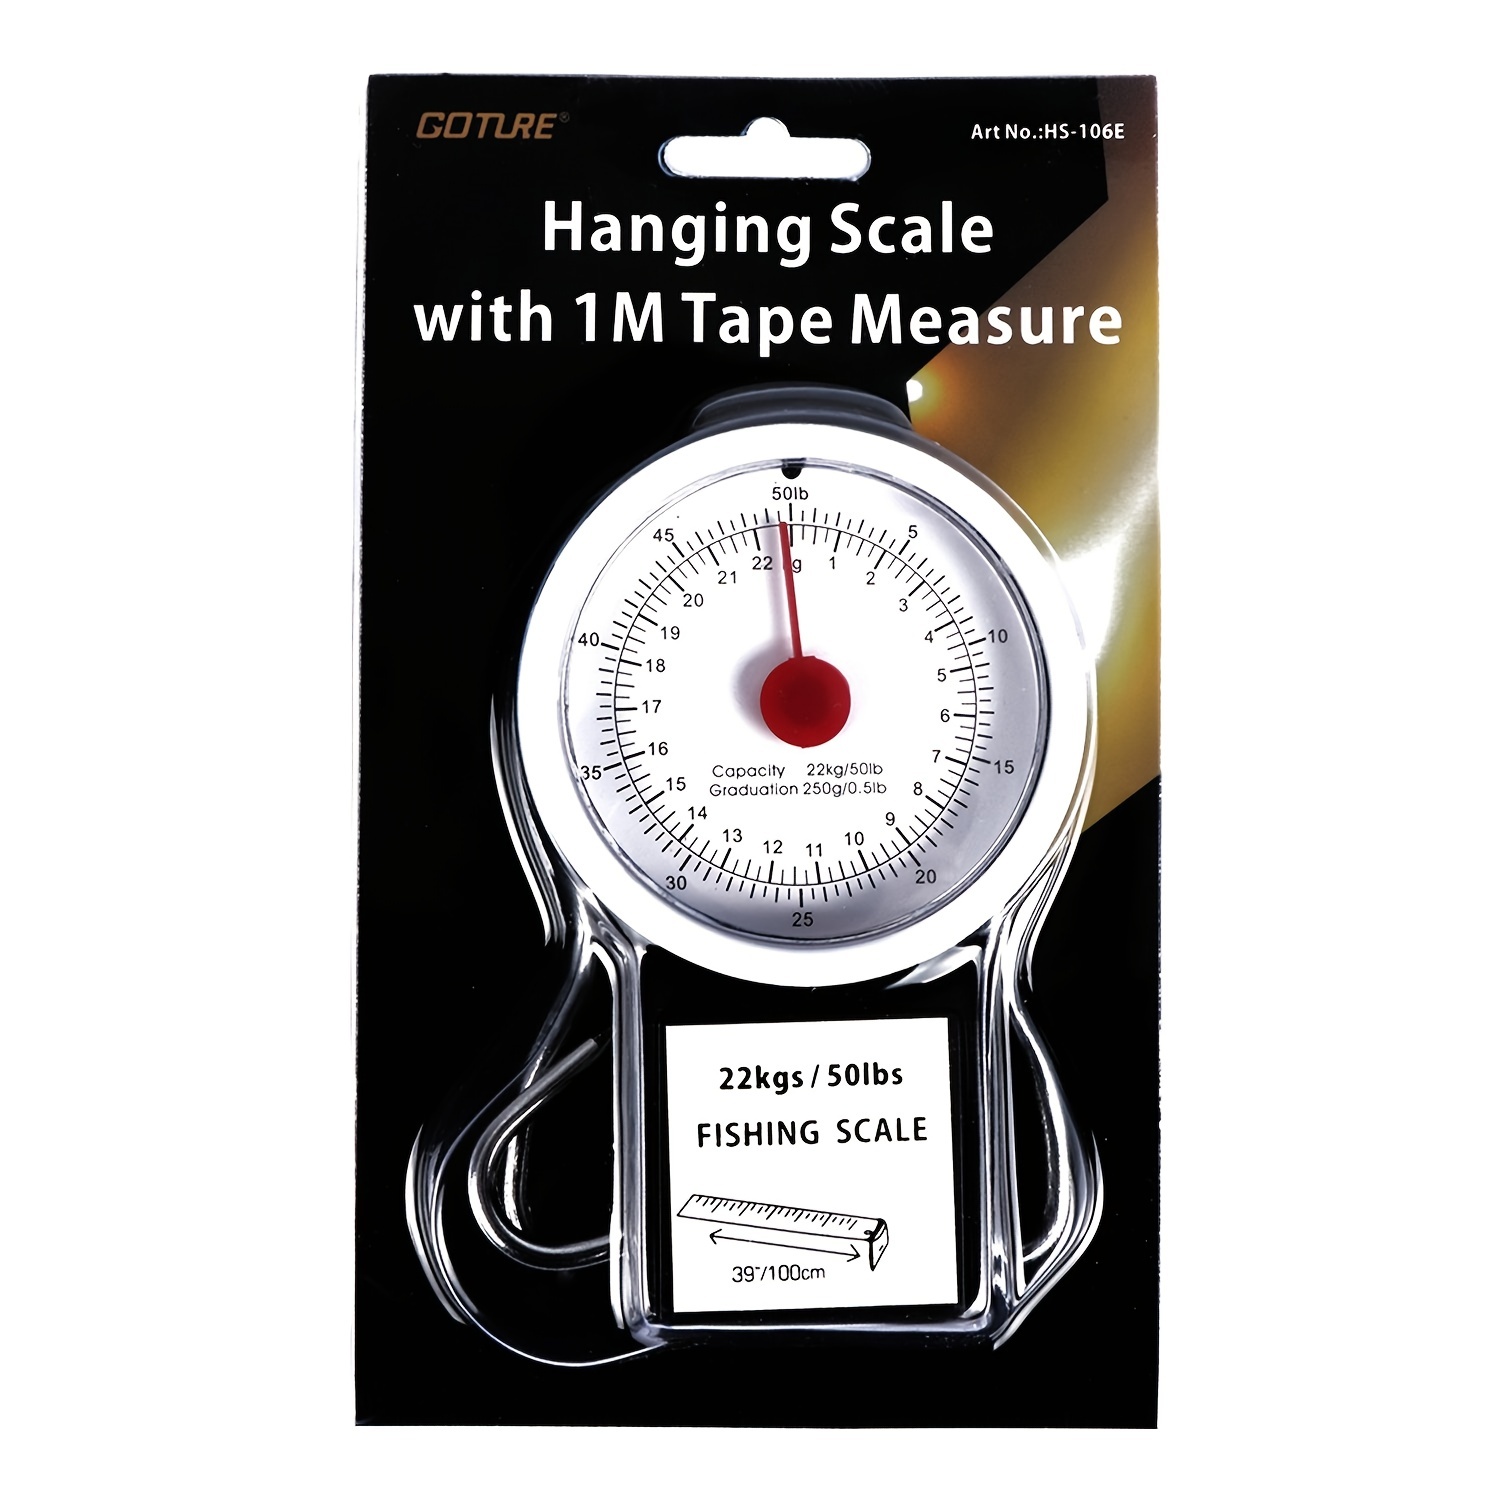 Portable Fishing Scale 50lb/22kg with 1M Tape Measure Hanging Hook